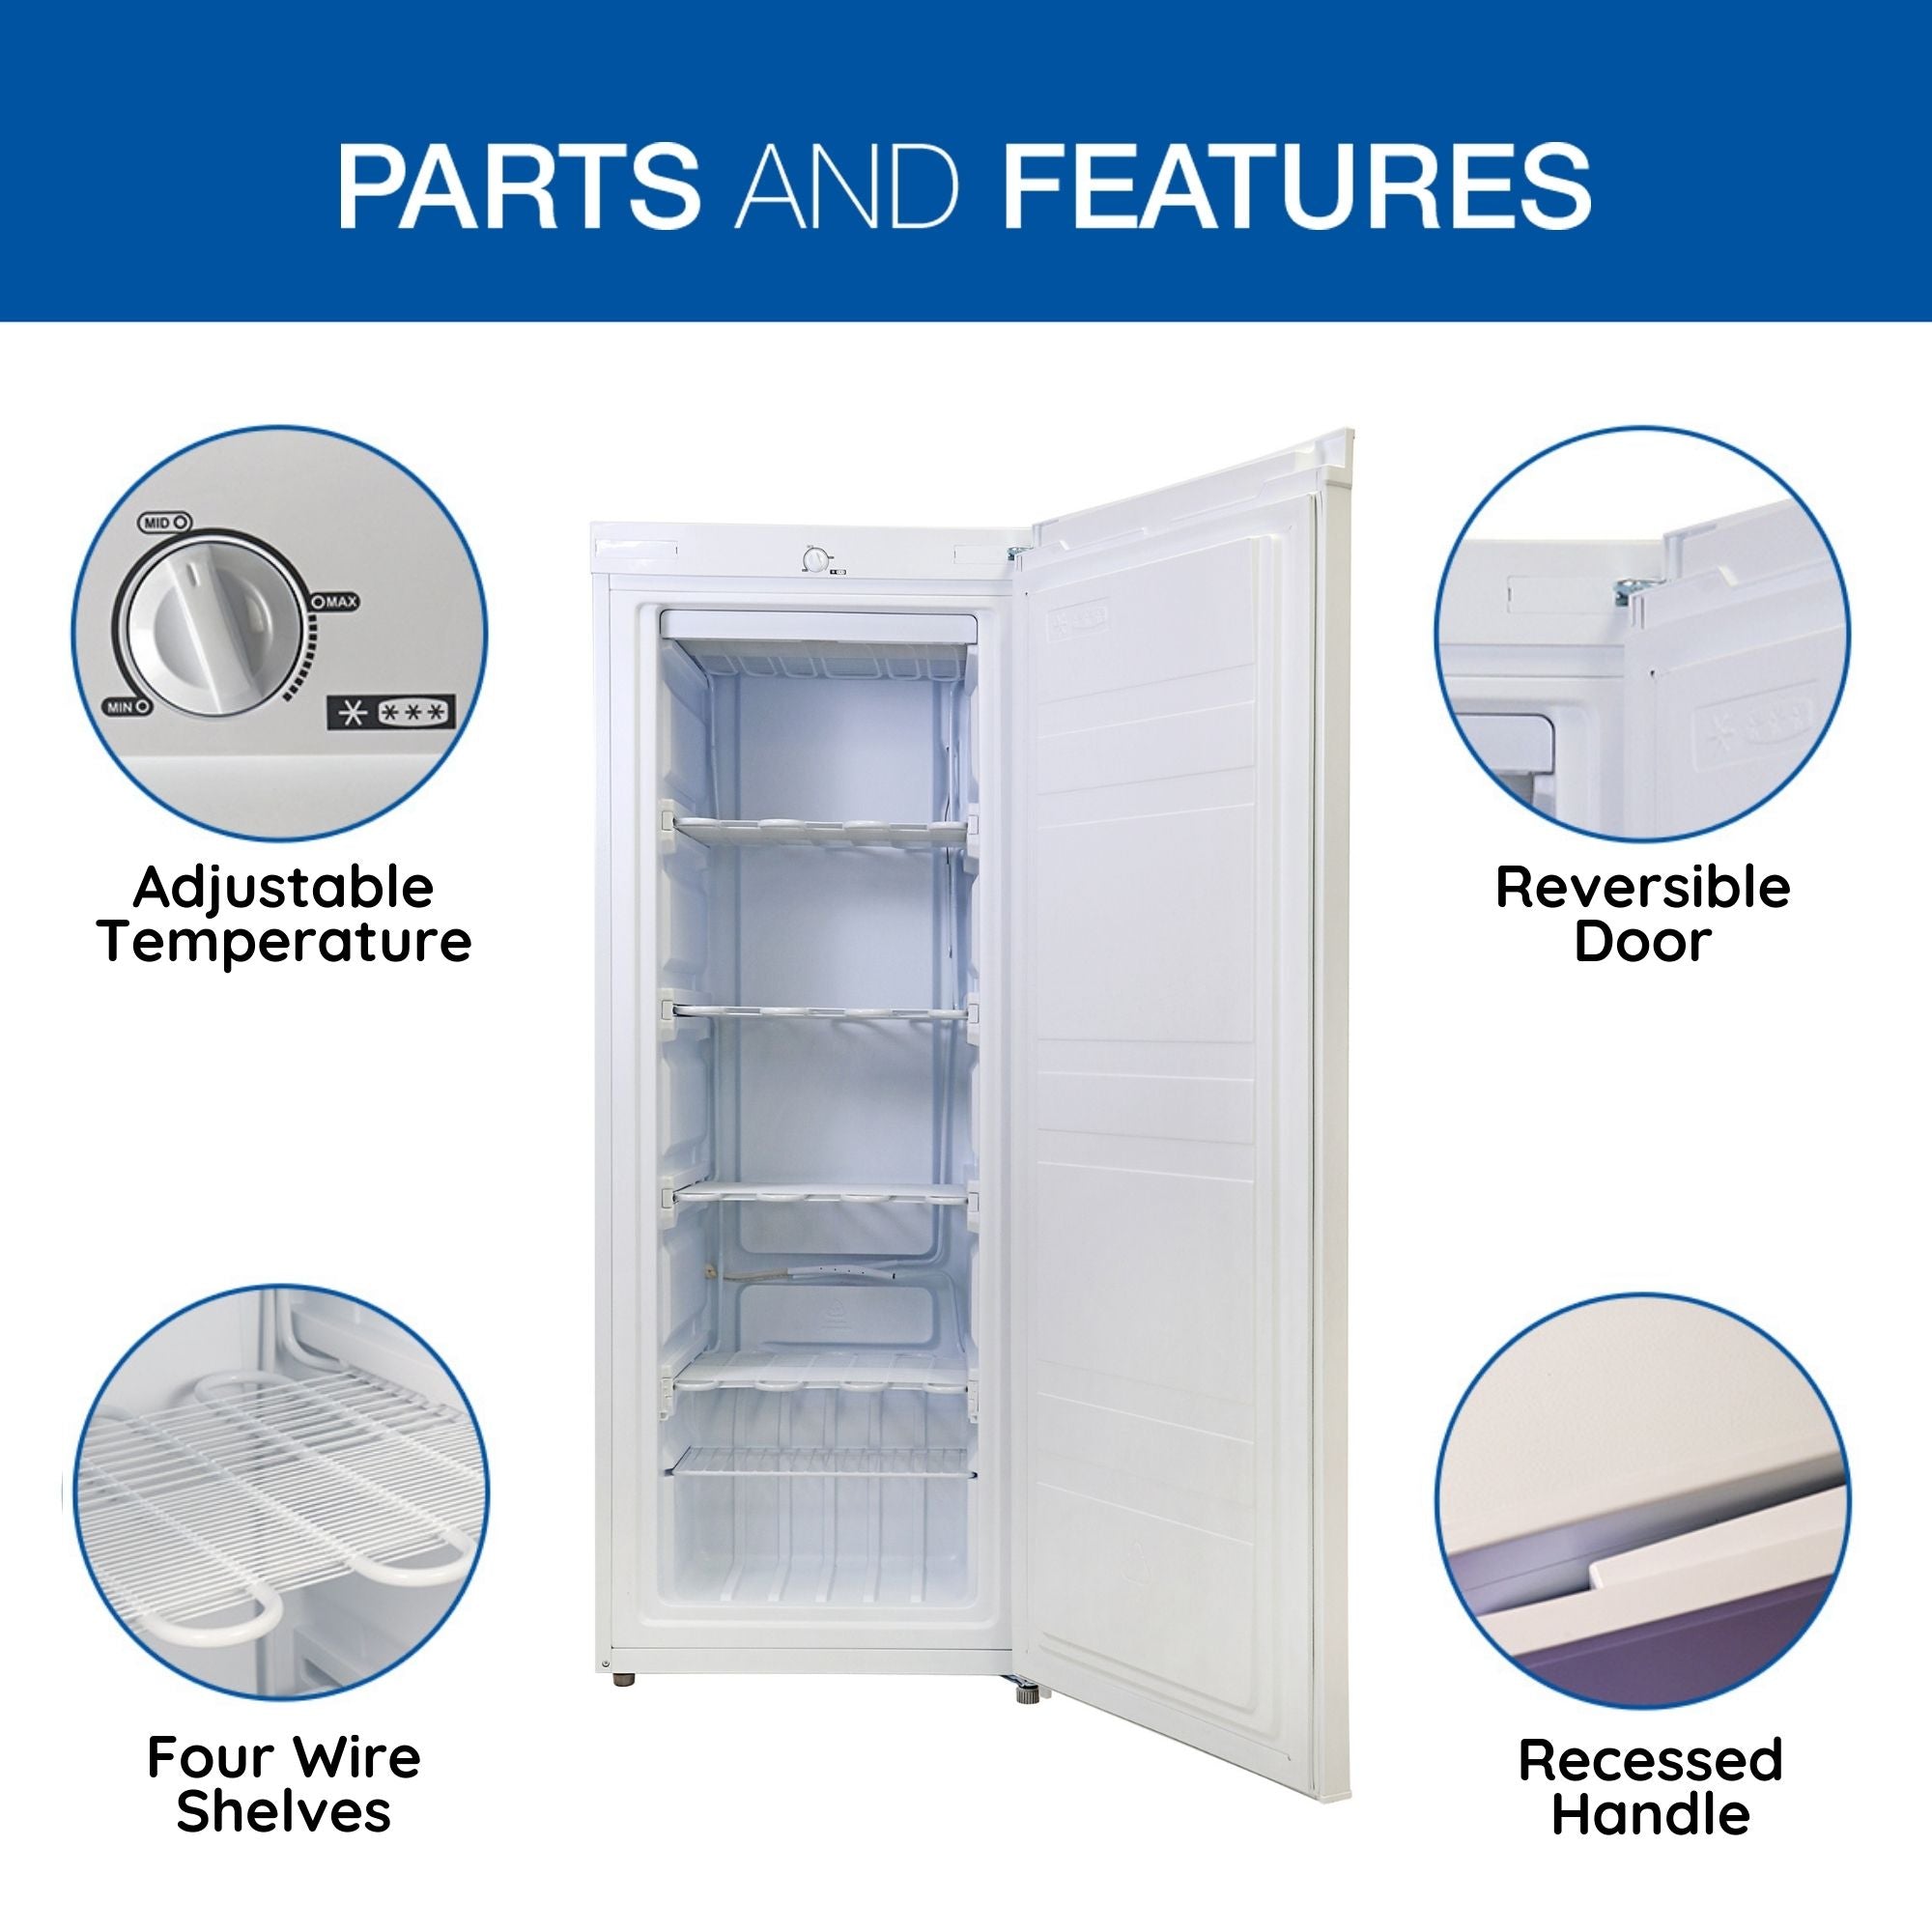 Product shot of open upright freezer surrounded by inset closeup images of parts, labeled: Adjustable temperature; Reversible door; Recessed handle; Four wire shelves